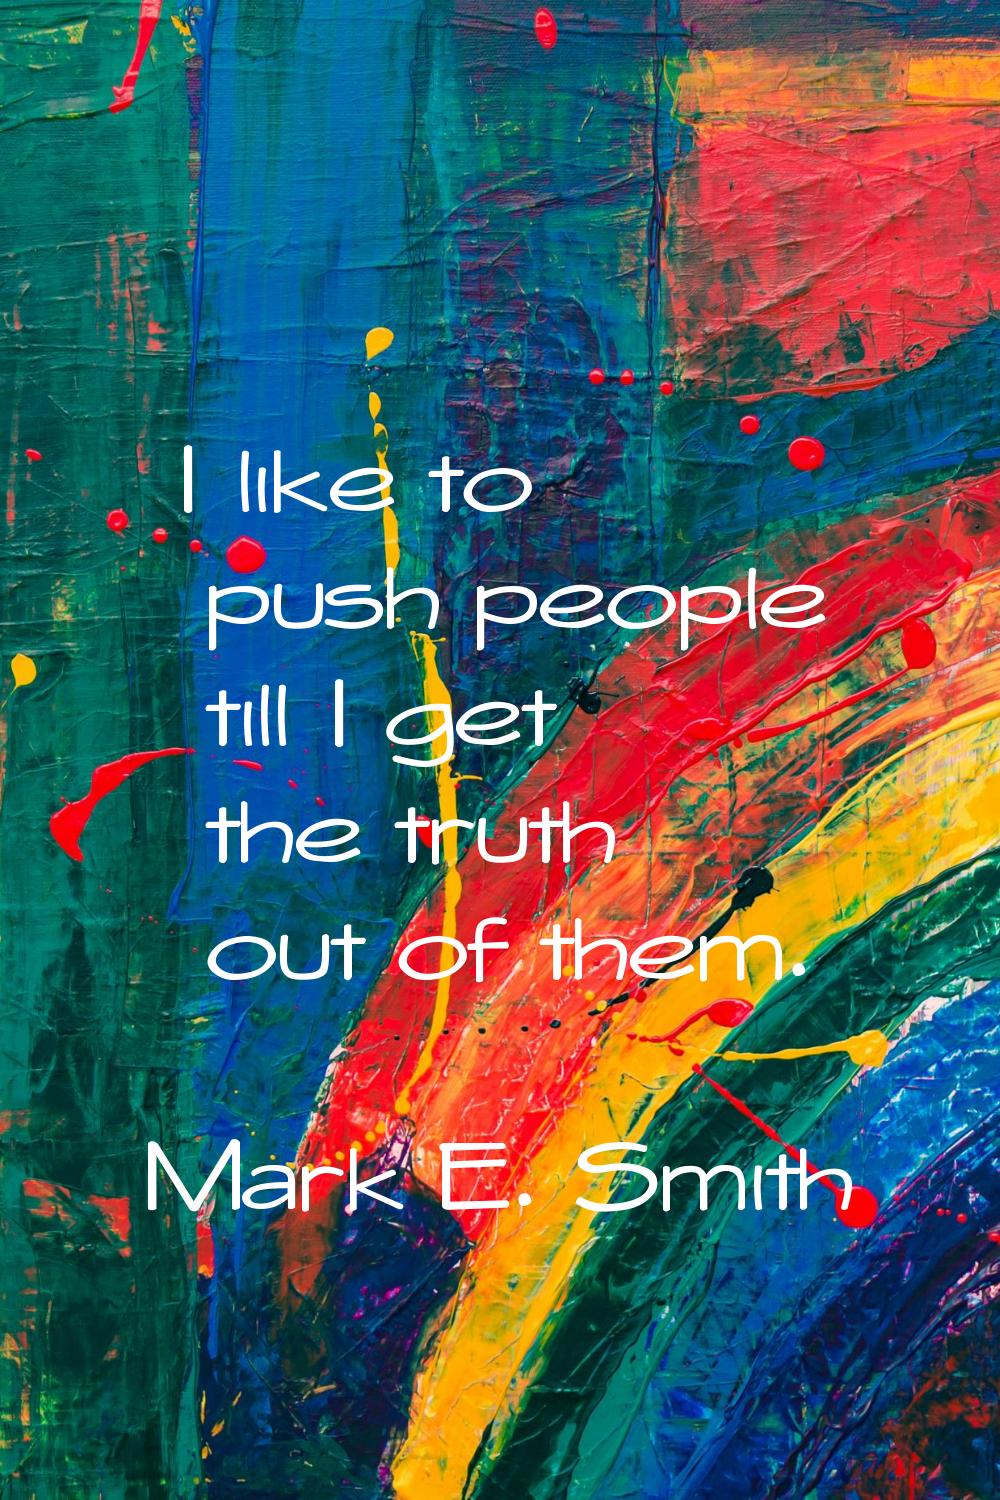 I like to push people till I get the truth out of them.